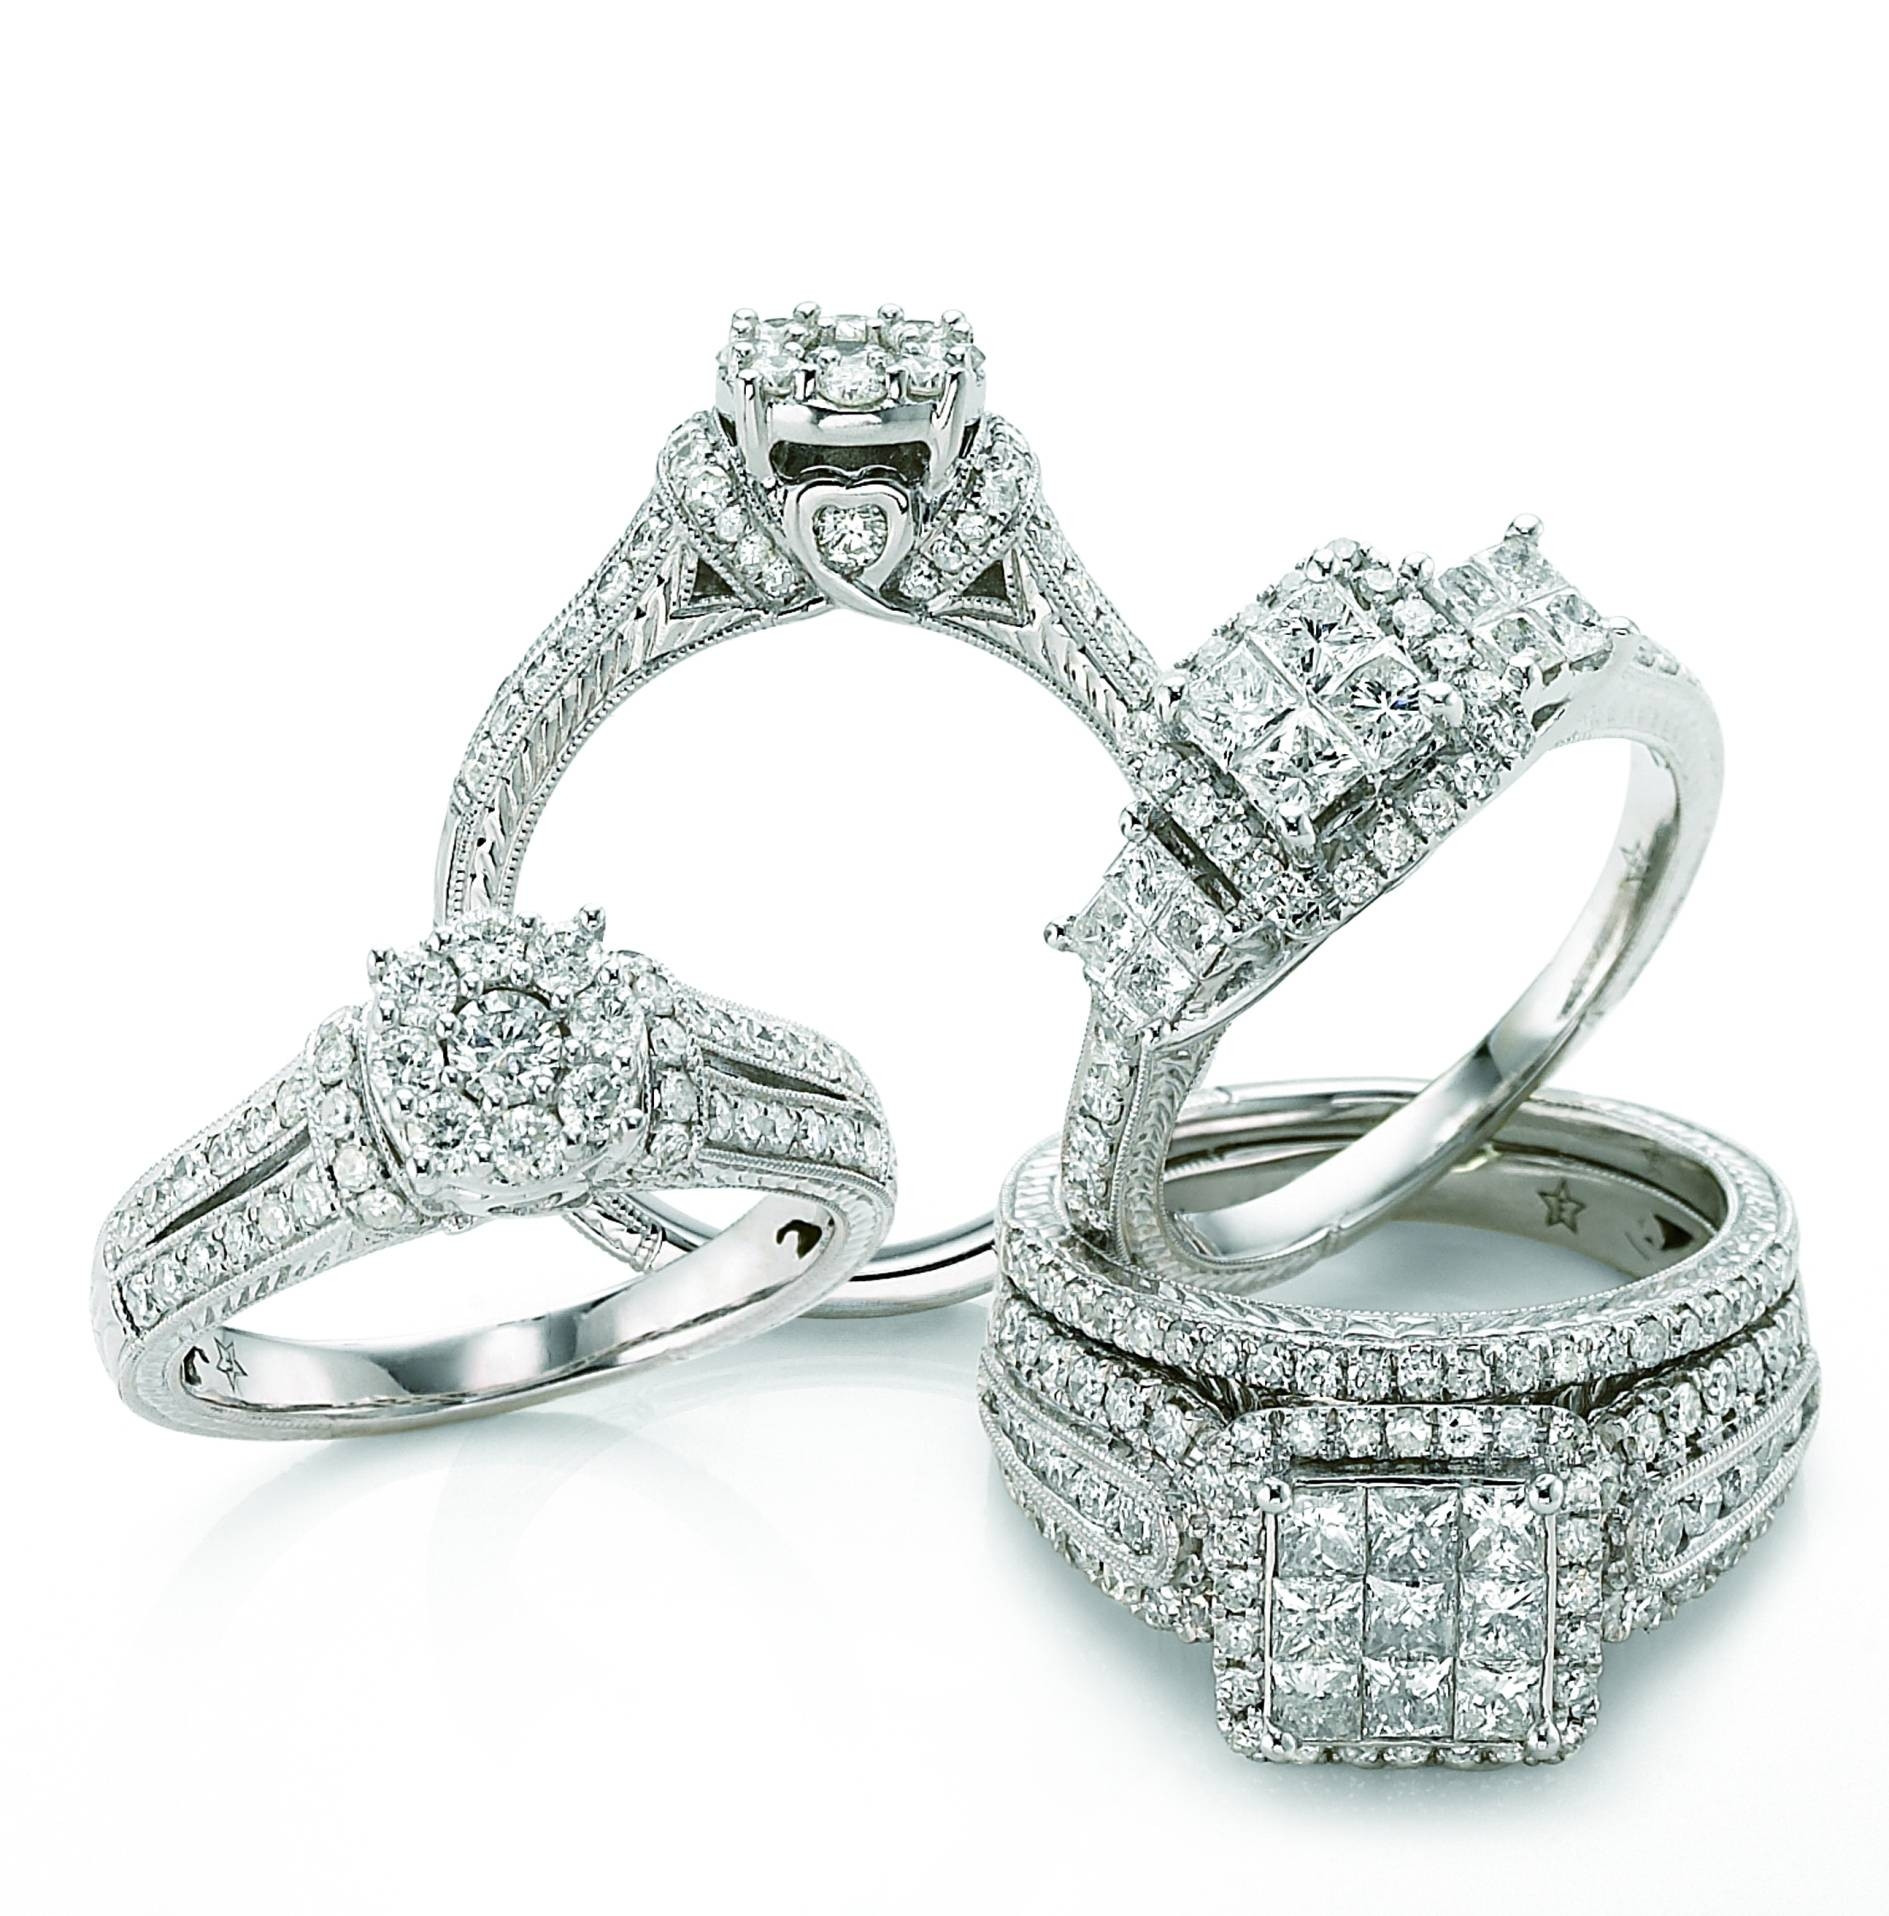 Jc Penney Wedding Rings
 15 Best Collection of Jcpenney Jewelry Wedding Bands